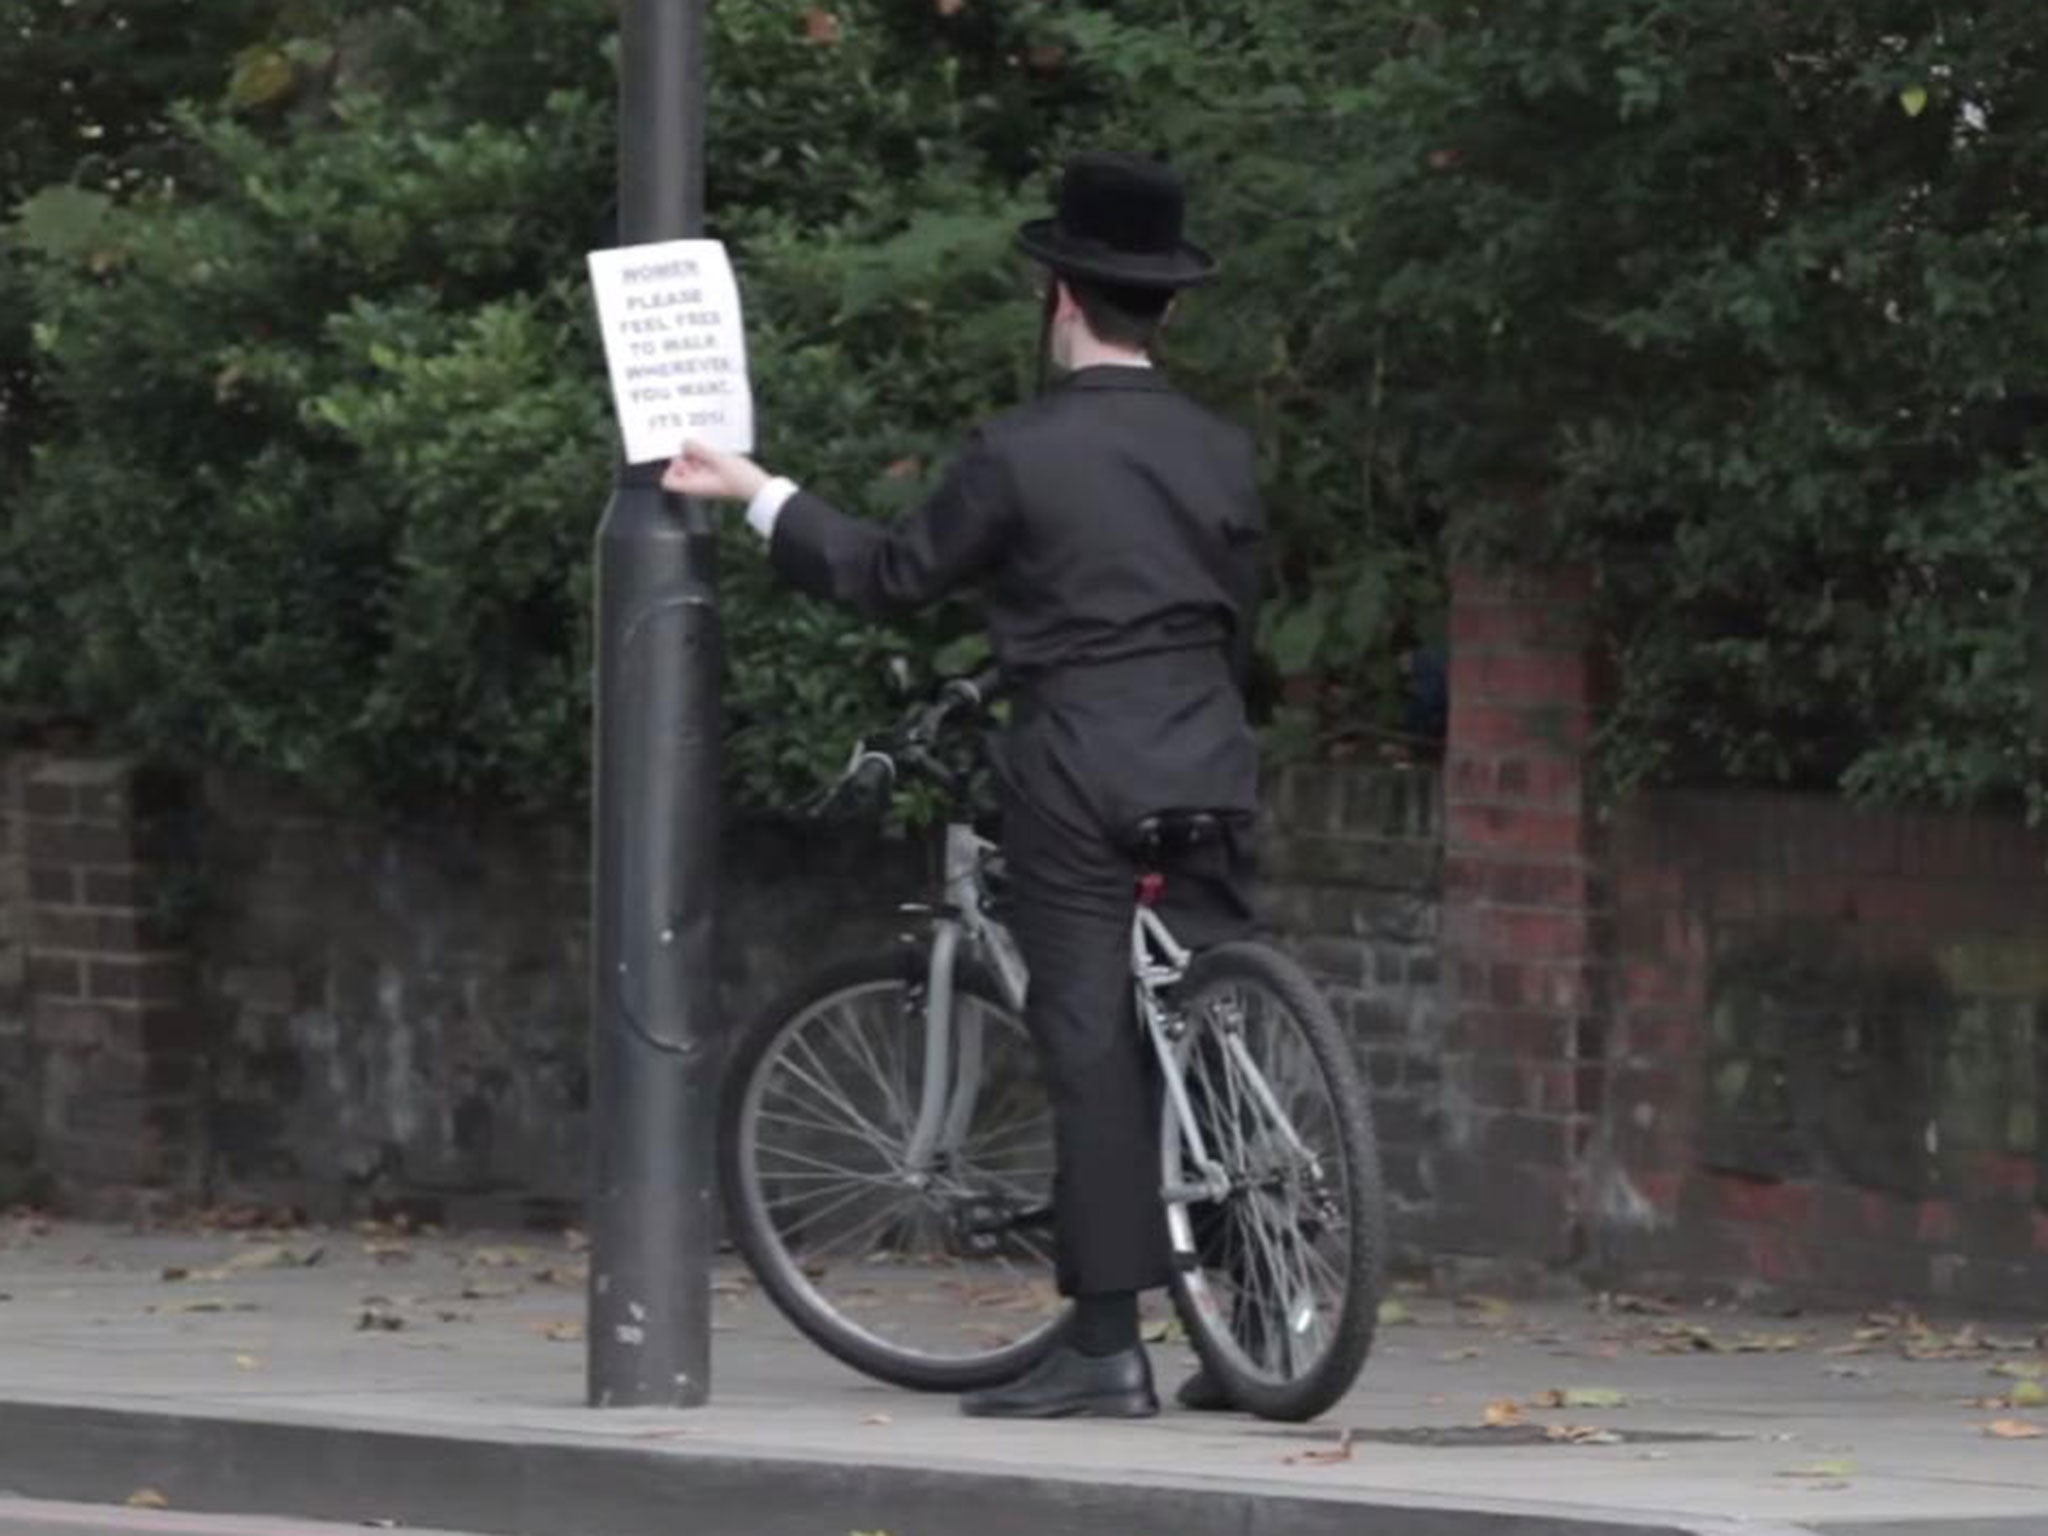 A Haredi Jewish boy was filmed taking down one of the alternative posters